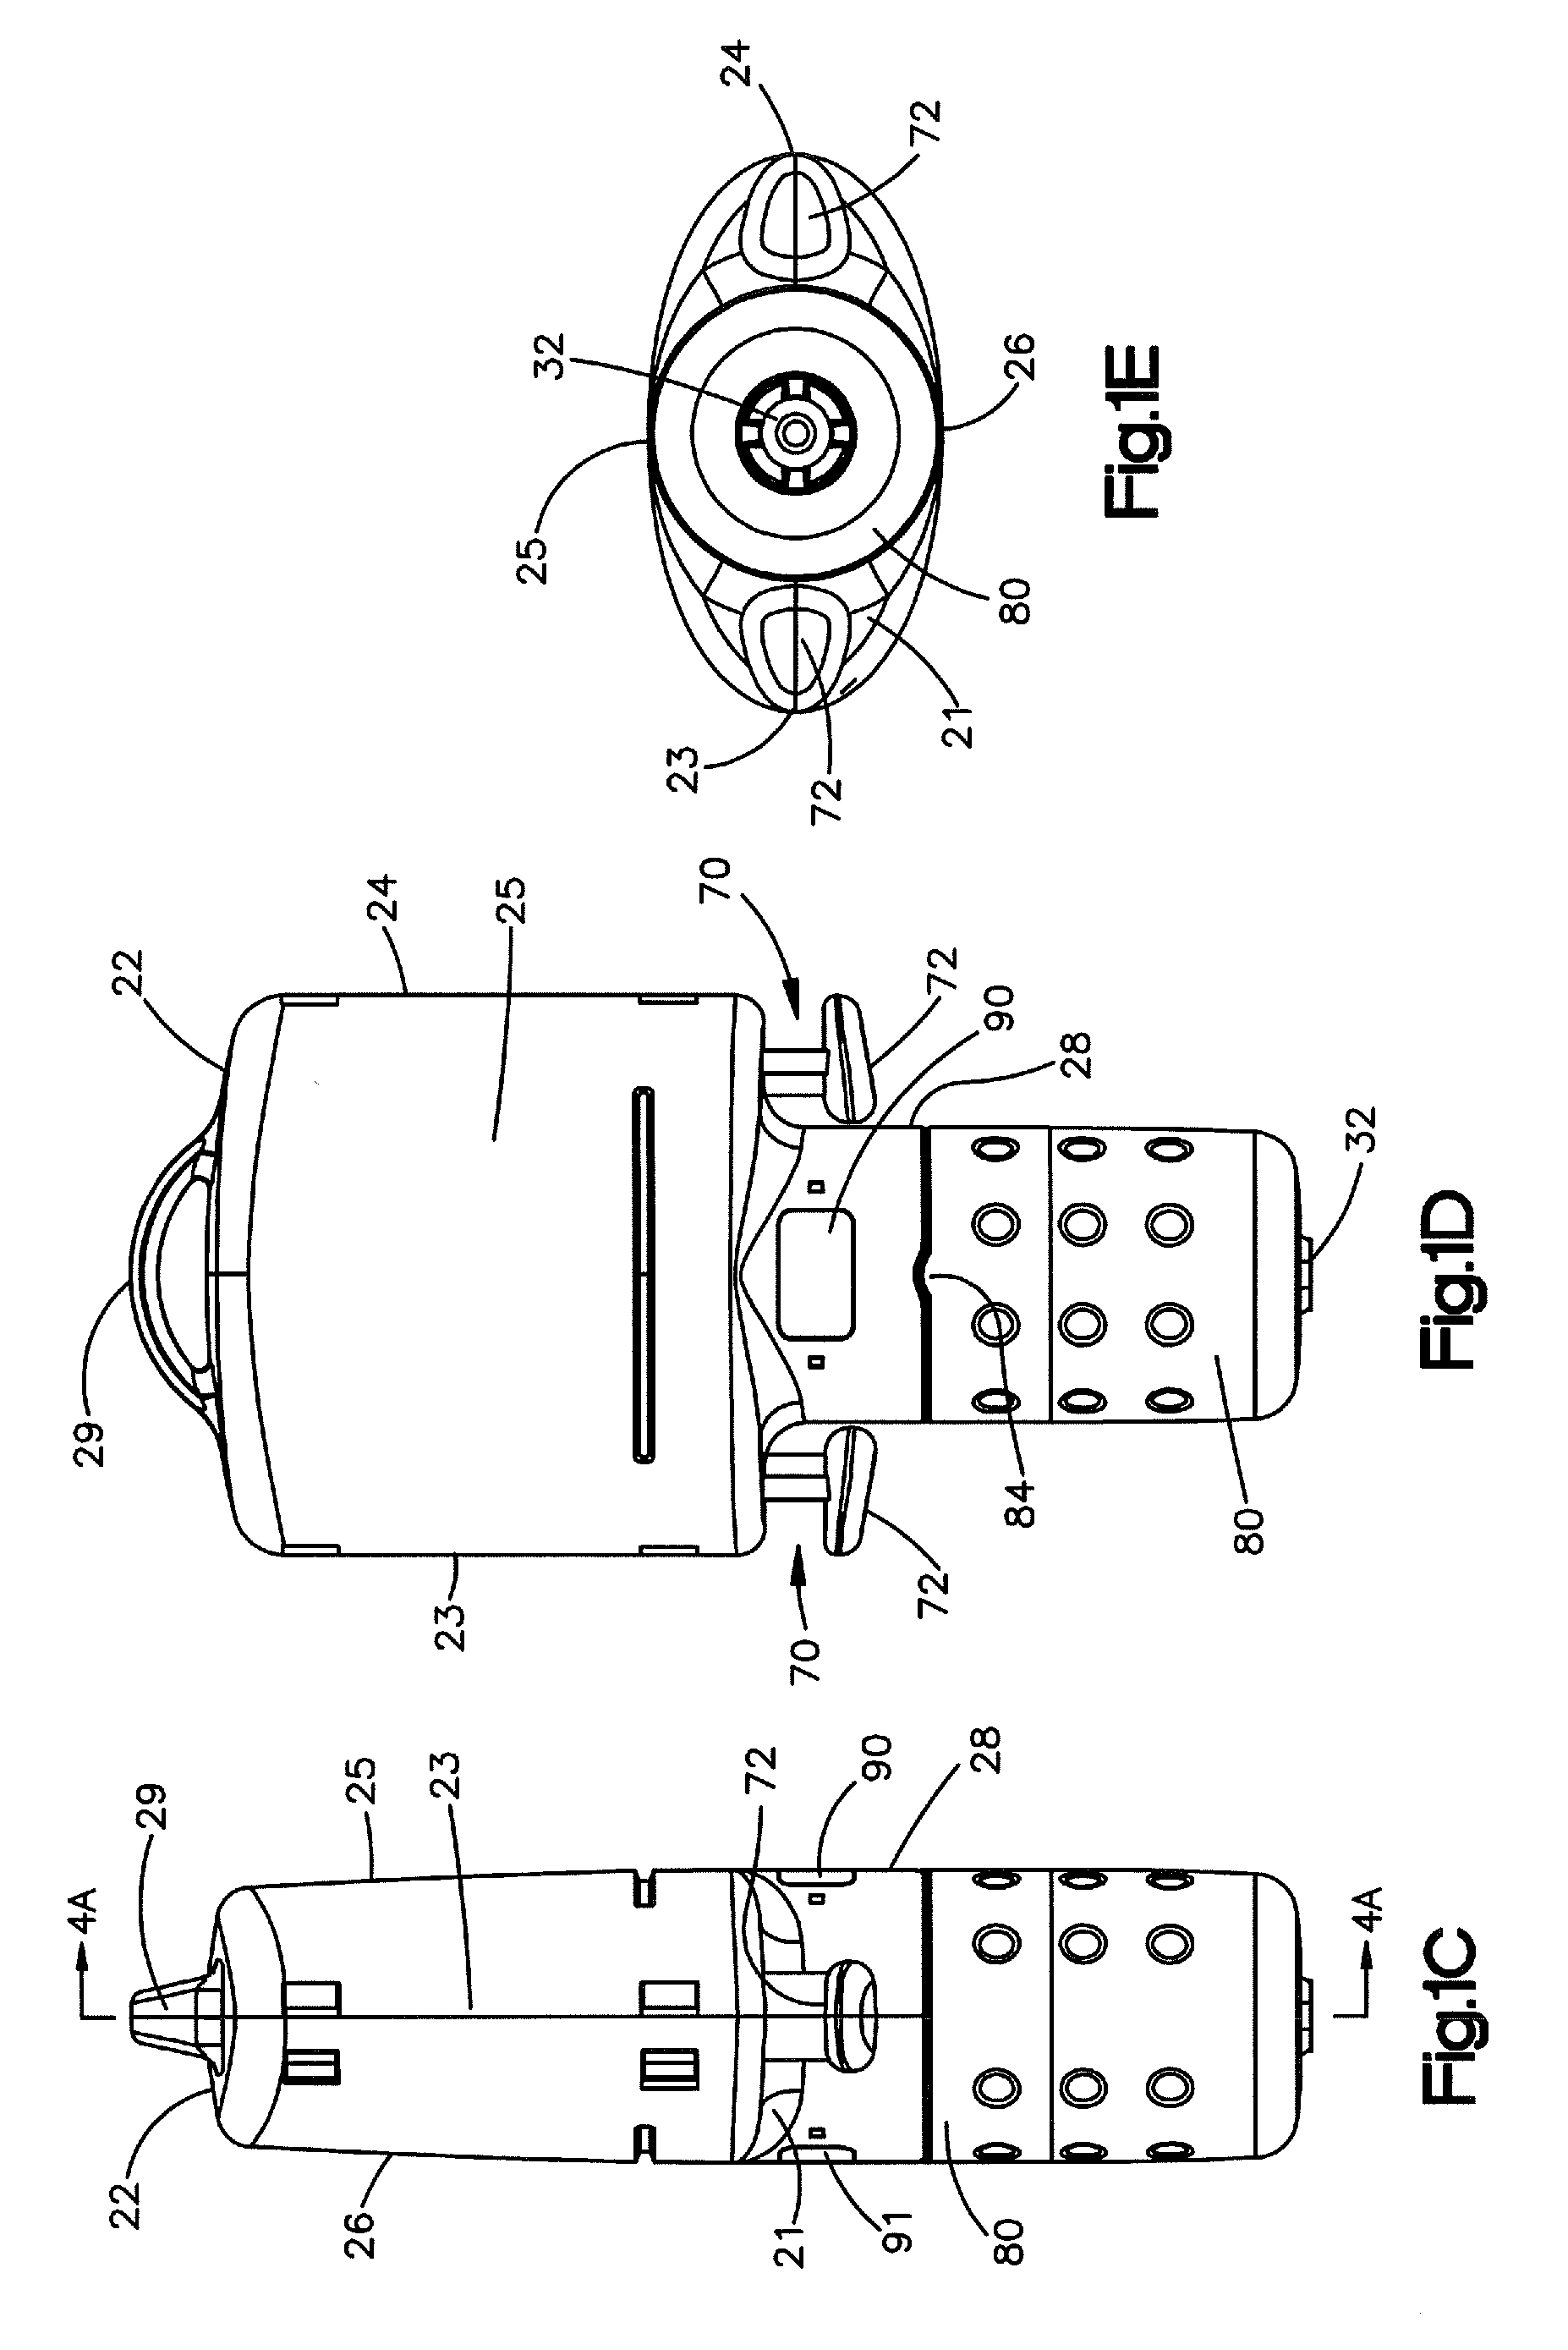 Injector for auto-injection of medication and associated method of use